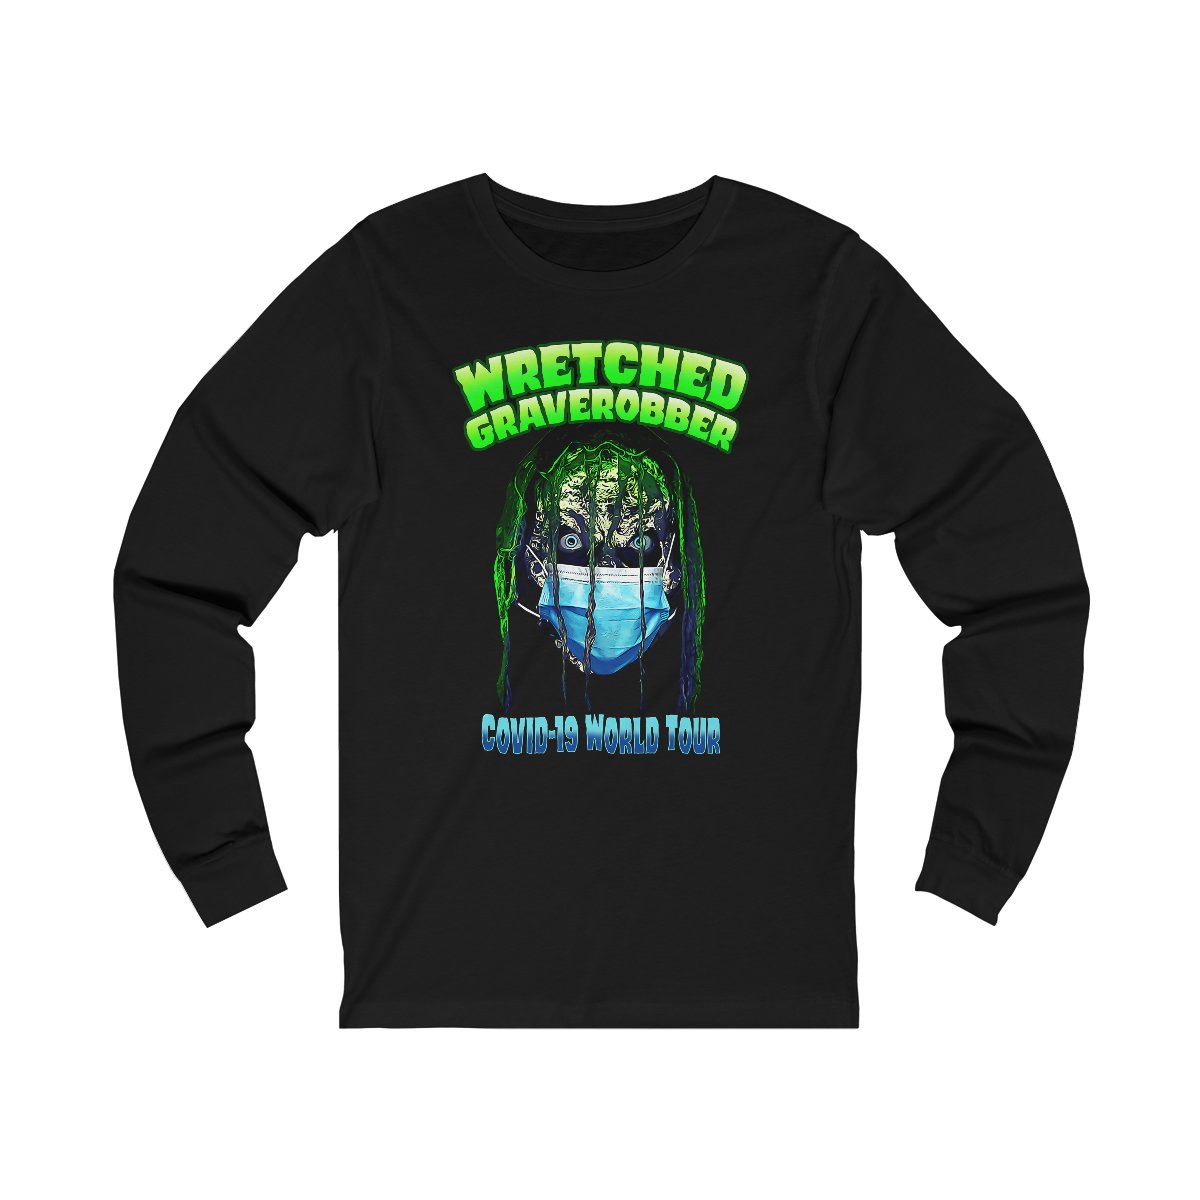 Wretched Graverobber Covid 19 World Tour Long Sleeve Tshirt 3501D